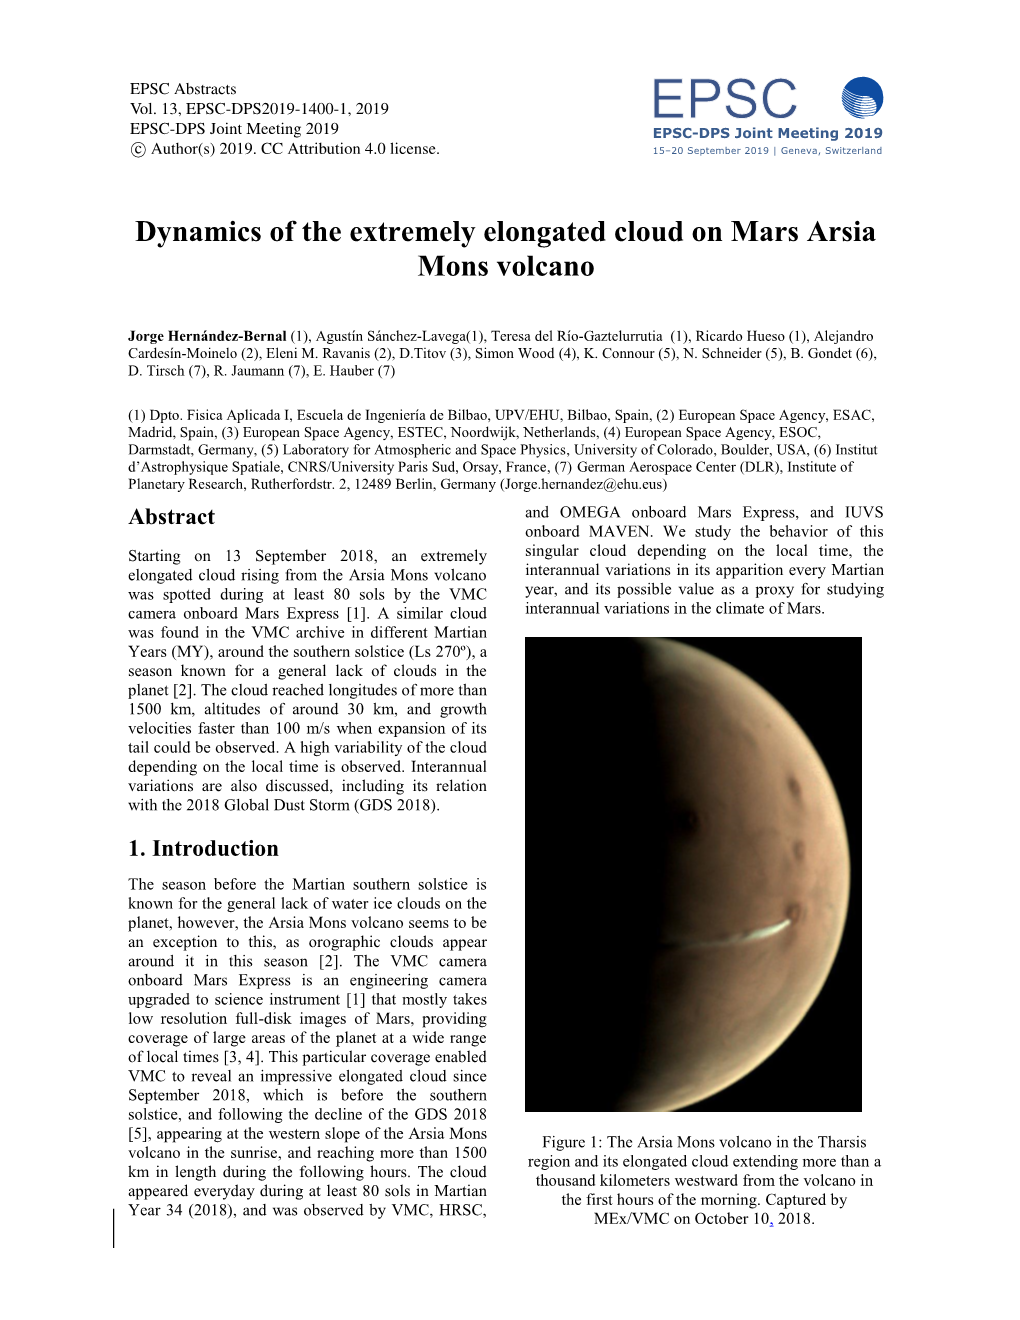 Dynamics of the Extremely Elongated Cloud on Mars Arsia Mons Volcano